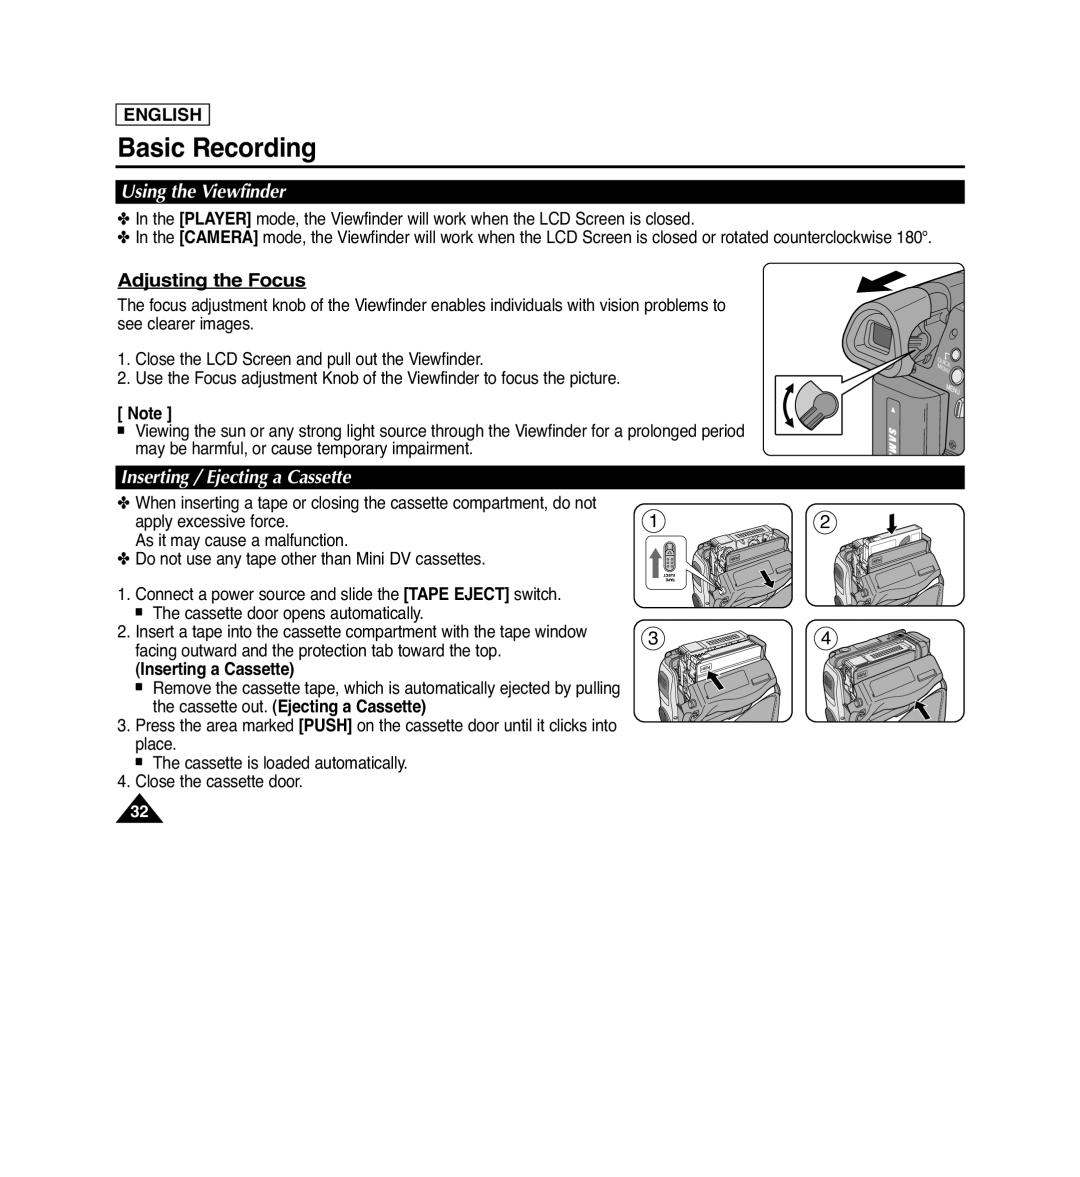 Samsung SC-D263 manual Basic Recording, Adjusting the Focus, Using the Viewfinder, Inserting / Ejecting a Cassette, English 